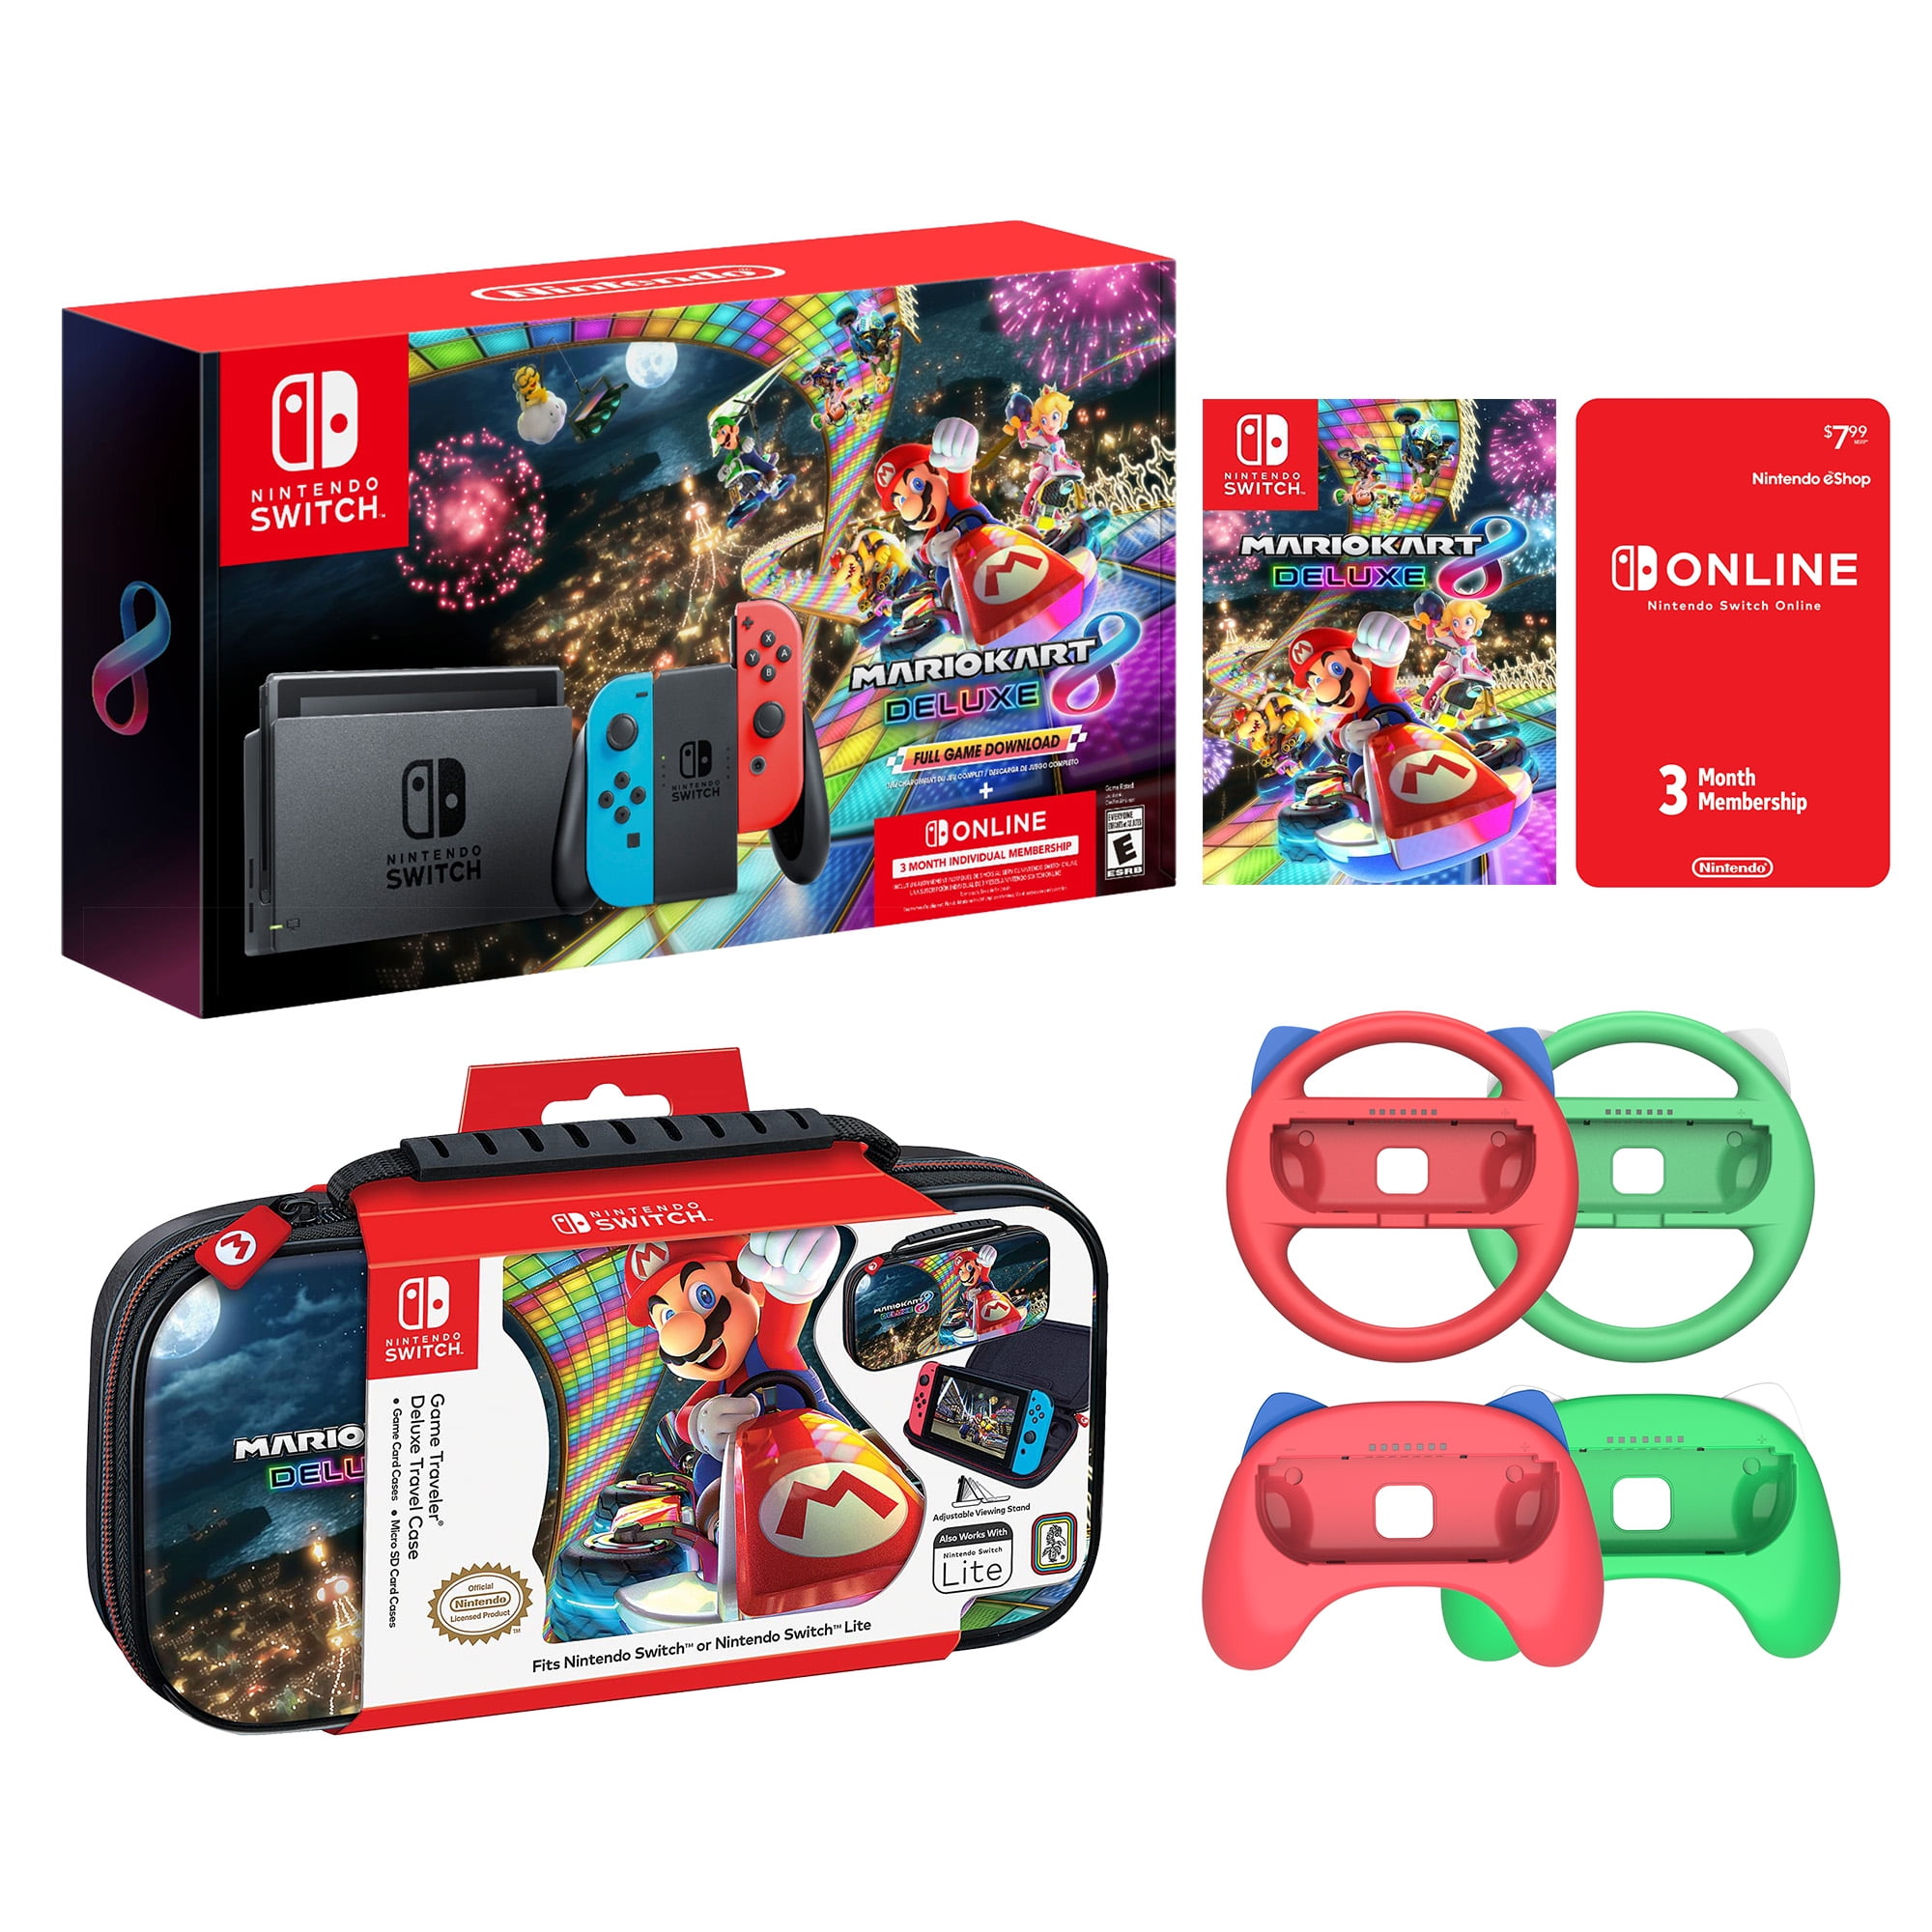 Nintendo Switch Mario Kart 8 Neon Racing Bundle: Red Blue JoyCon Console,  Mario Kart 8 Deluxe and Online Membership, Travel Case, Mytrix Wheels and